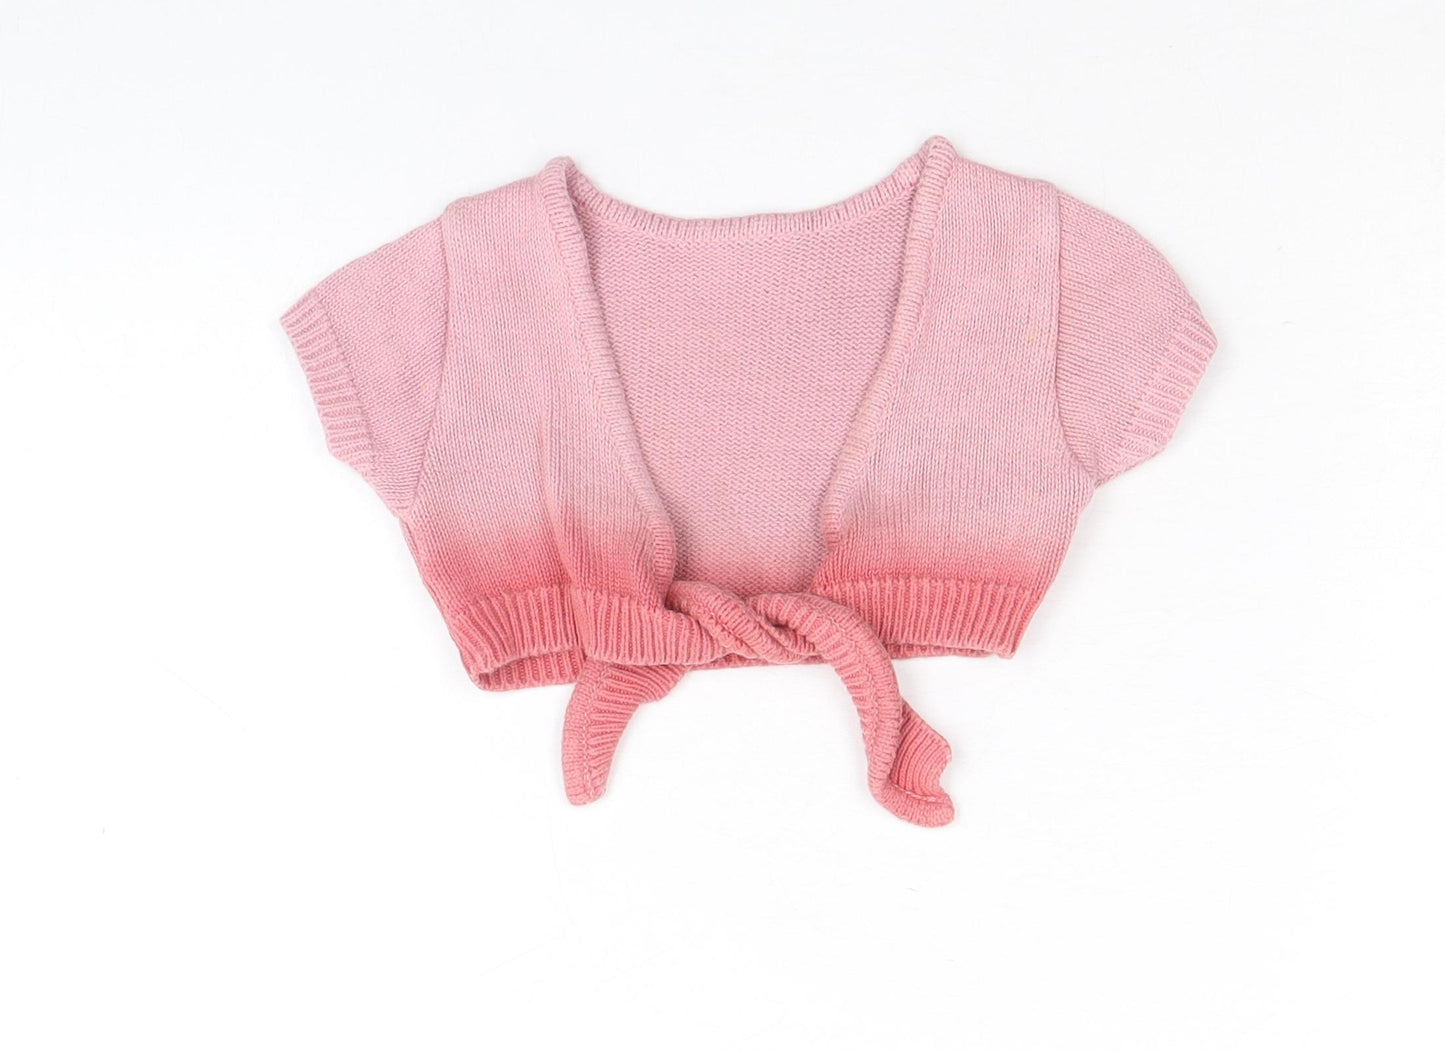 Marks and Spencer Girls Pink Cotton Cardigan Jumper Size 3-6 Months Tie - Tie Front